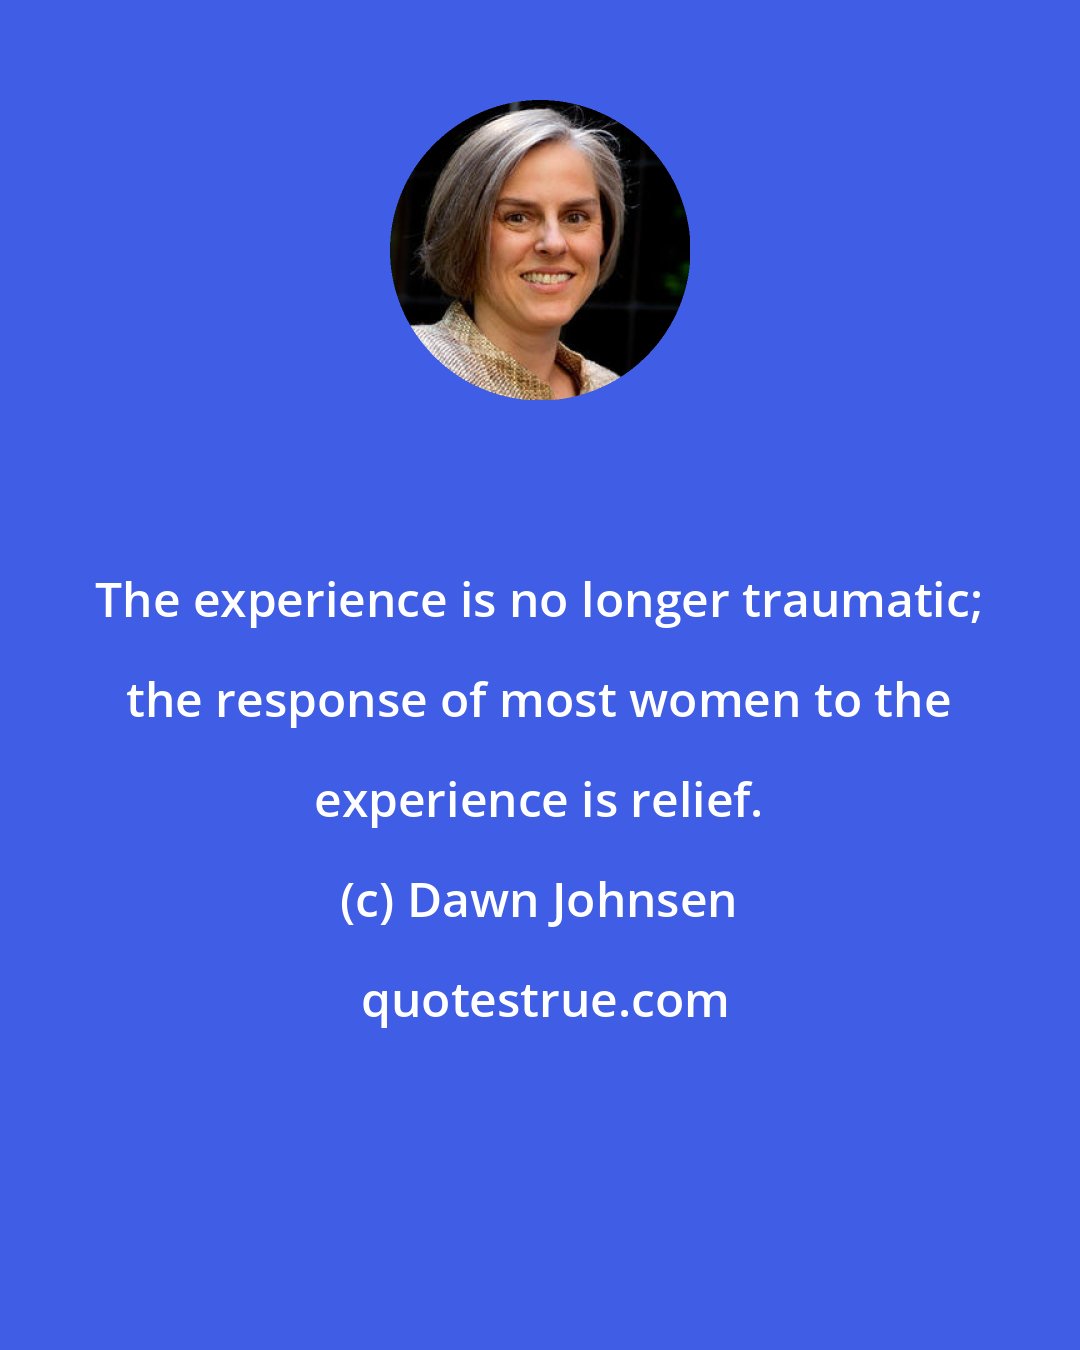 Dawn Johnsen: The experience is no longer traumatic; the response of most women to the experience is relief.